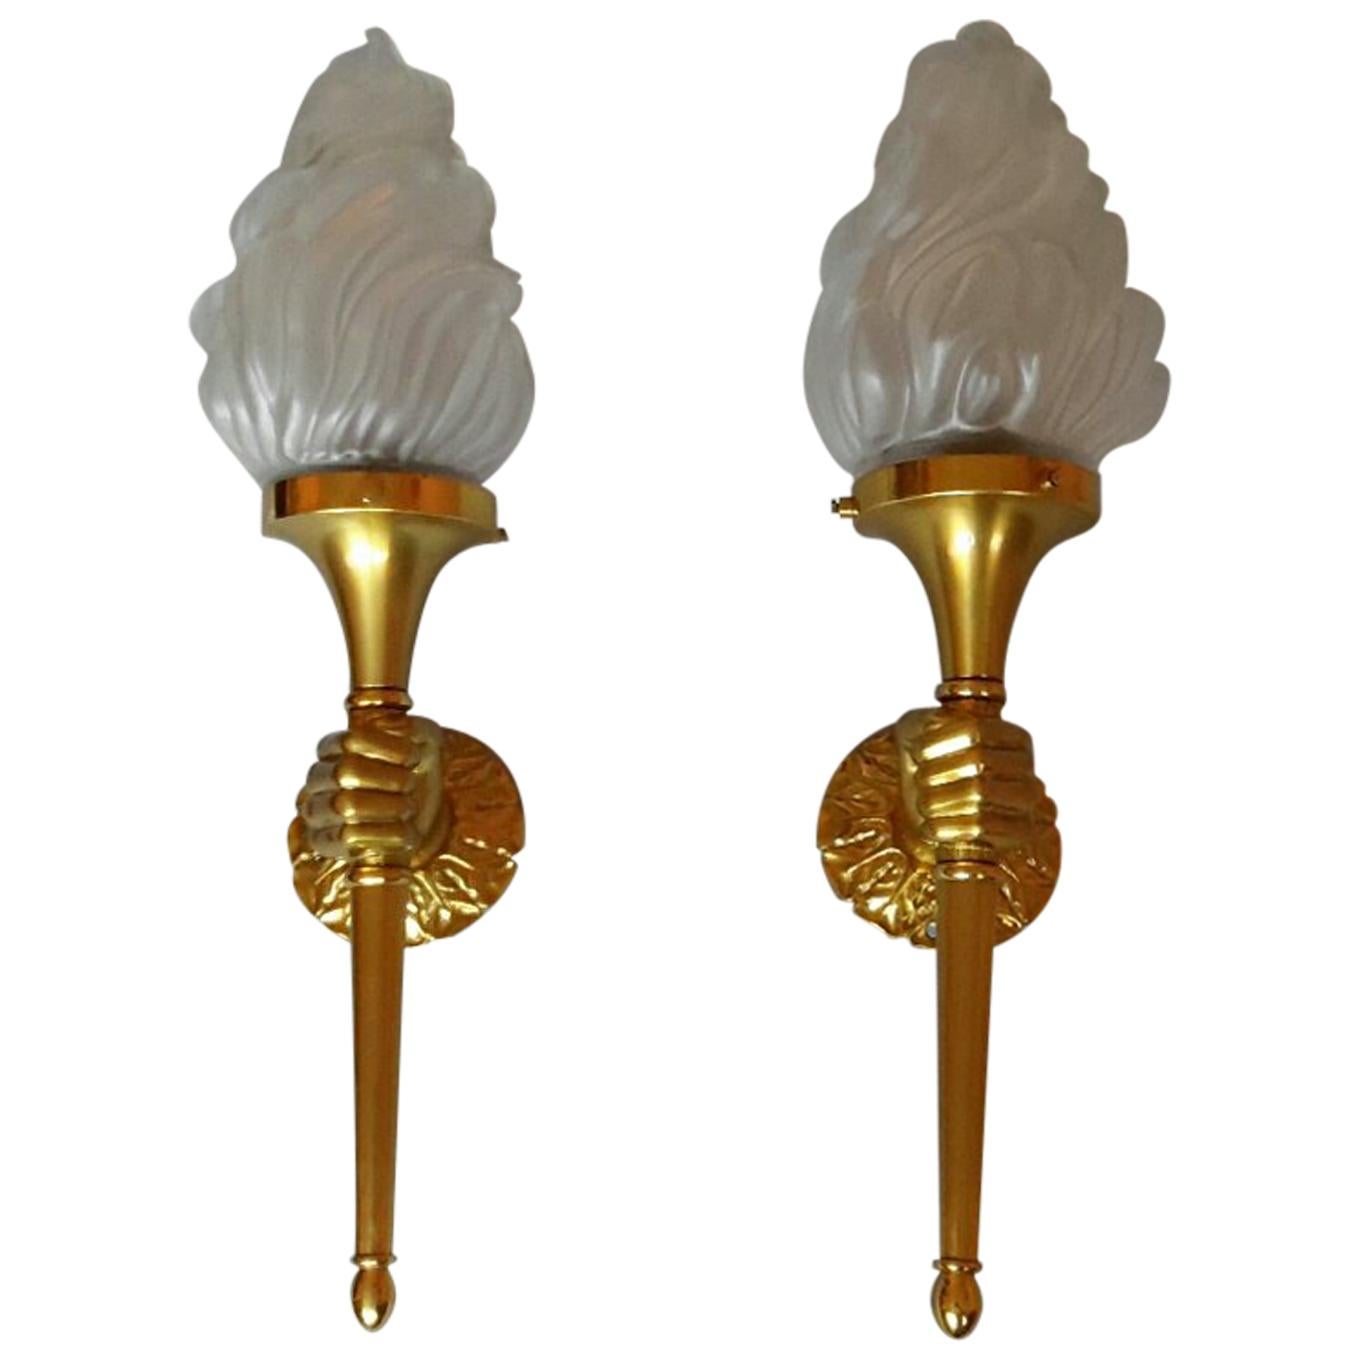 Neoclassical Pair of Big Gilt Bronze Sconces by Maison Bagues, France, 1960s